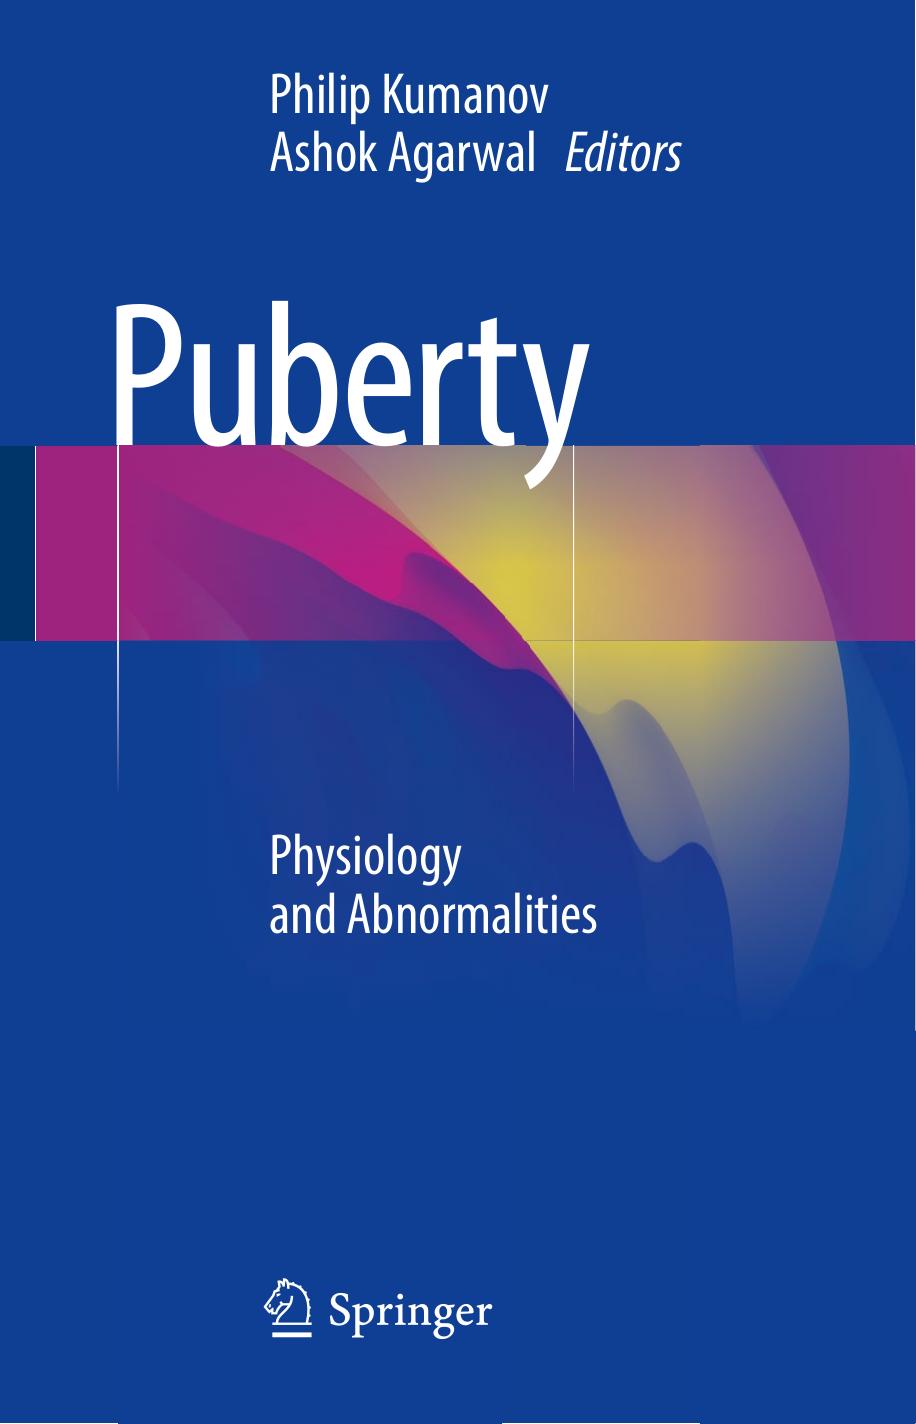 Puberty Physiology and Abnormalities 2016